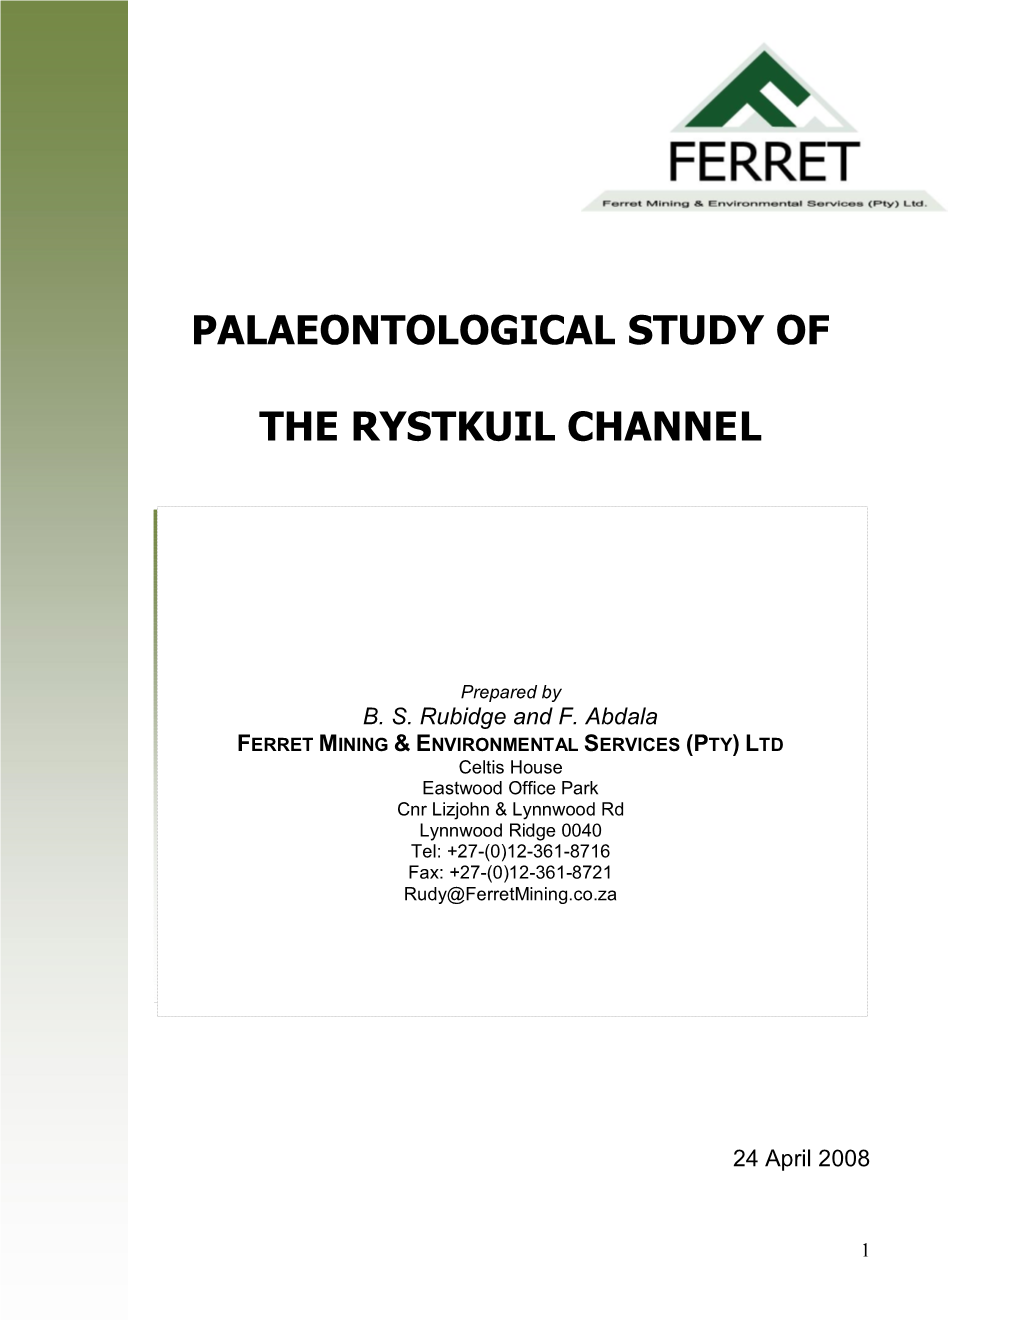 Palaeontological Study of the Rystkuil Channel